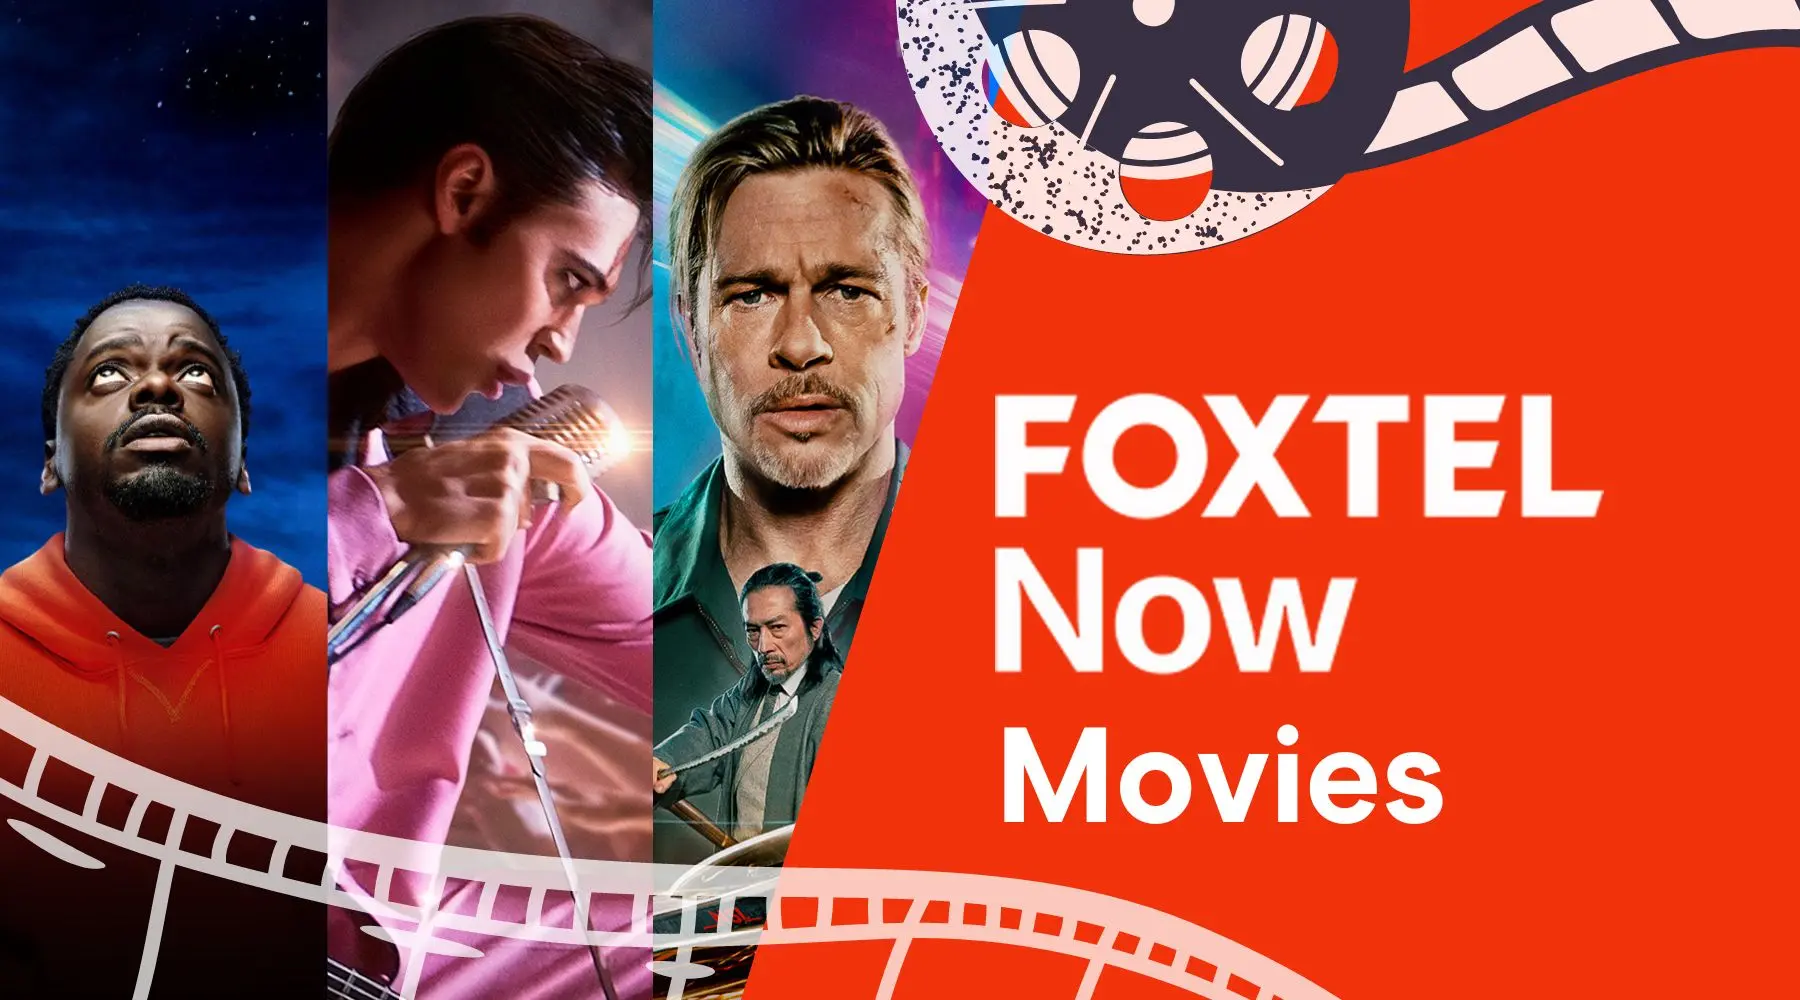 Foxtel Now movies